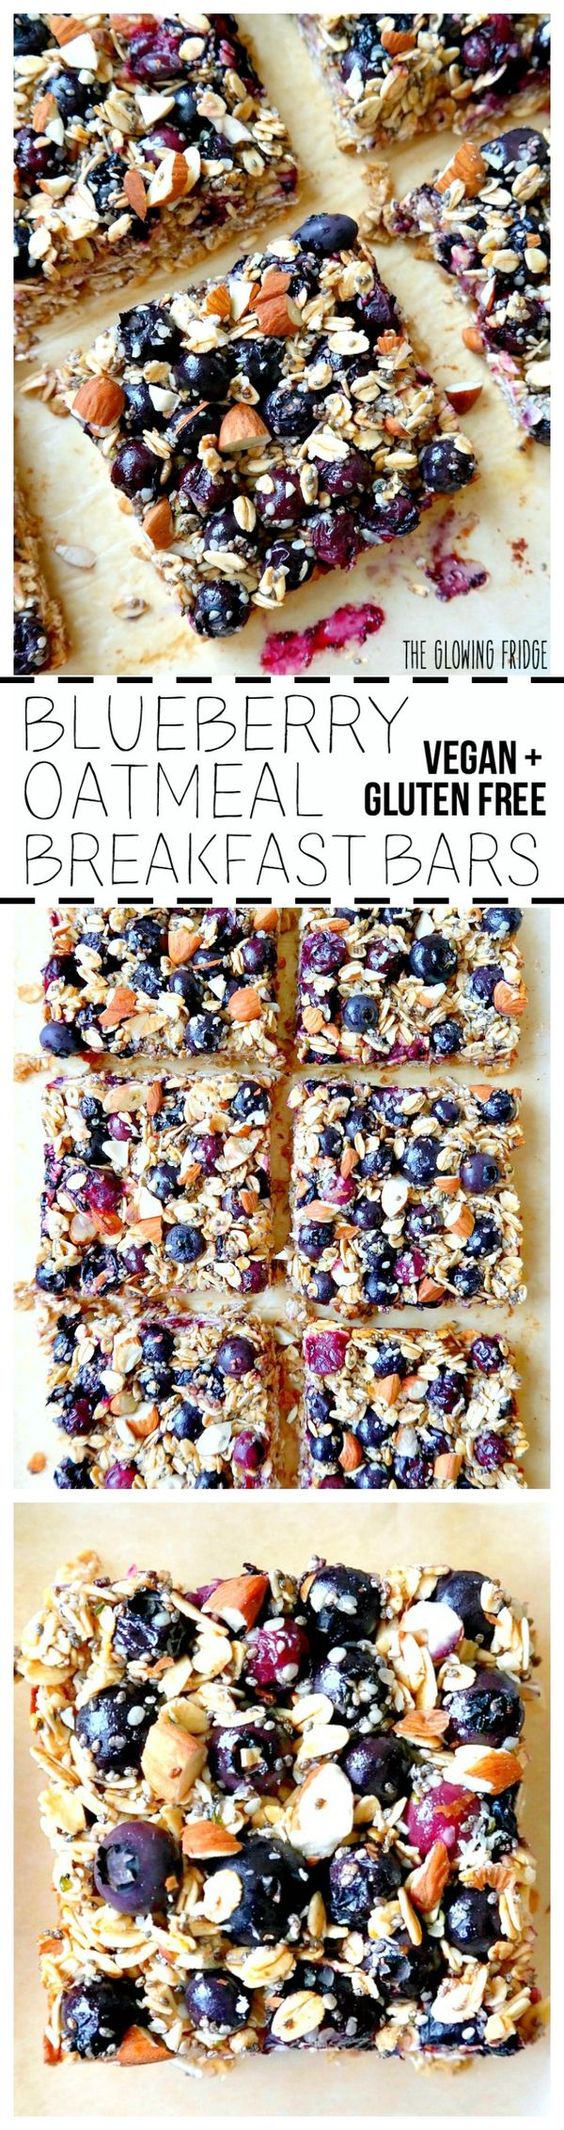 10 Super Healthy Breakfast Ideas | Stay At Home Mum